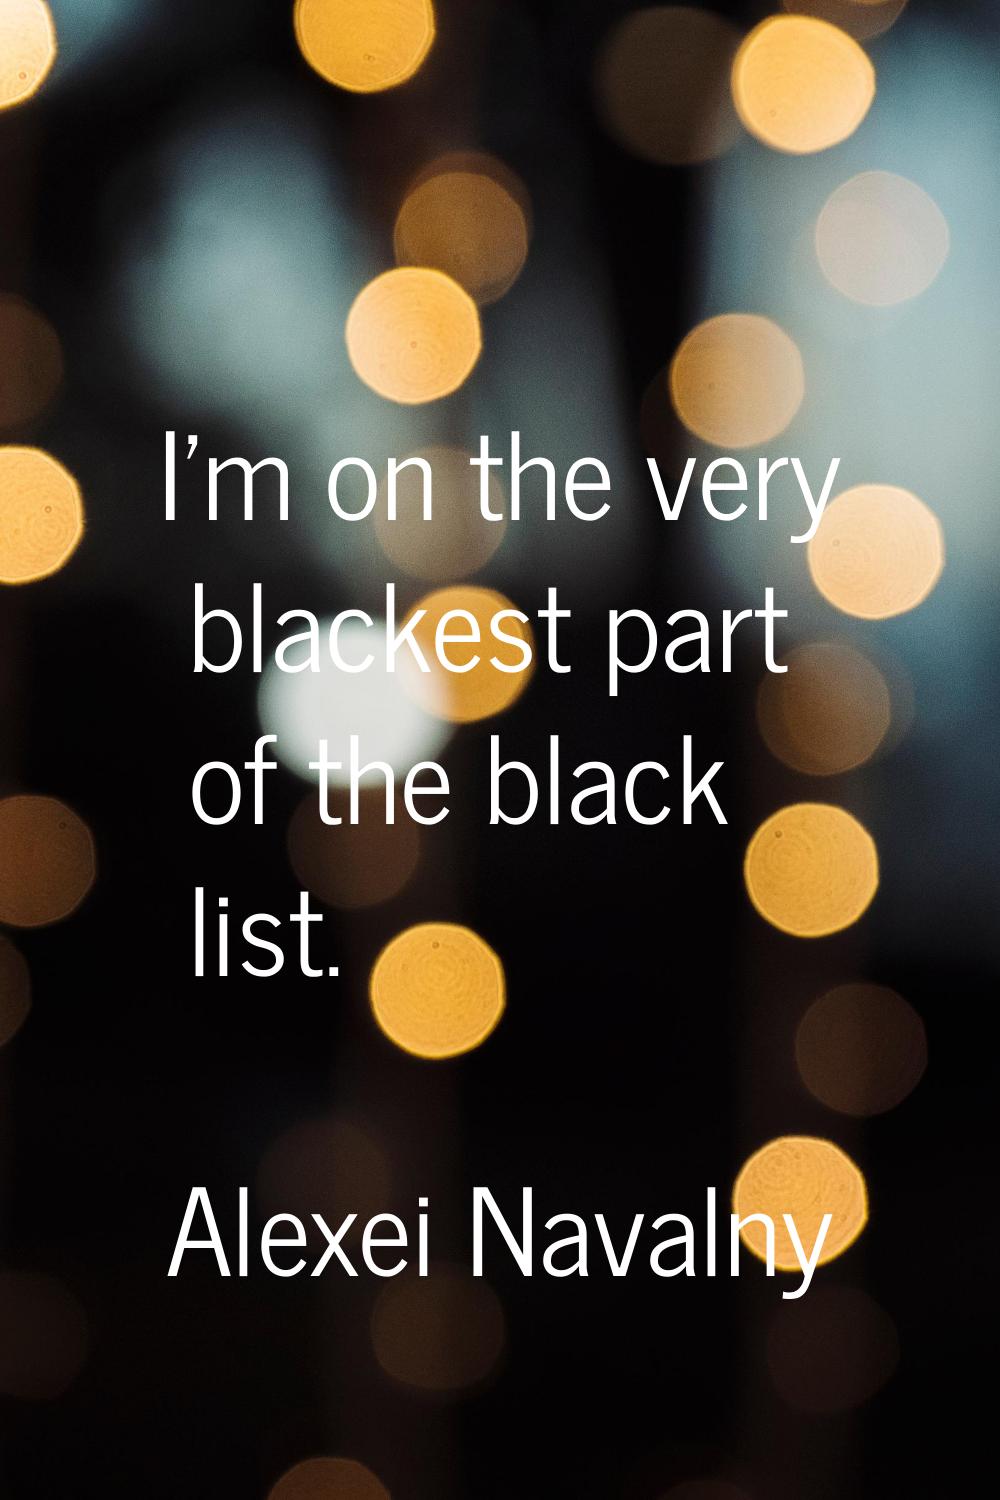 I'm on the very blackest part of the black list.